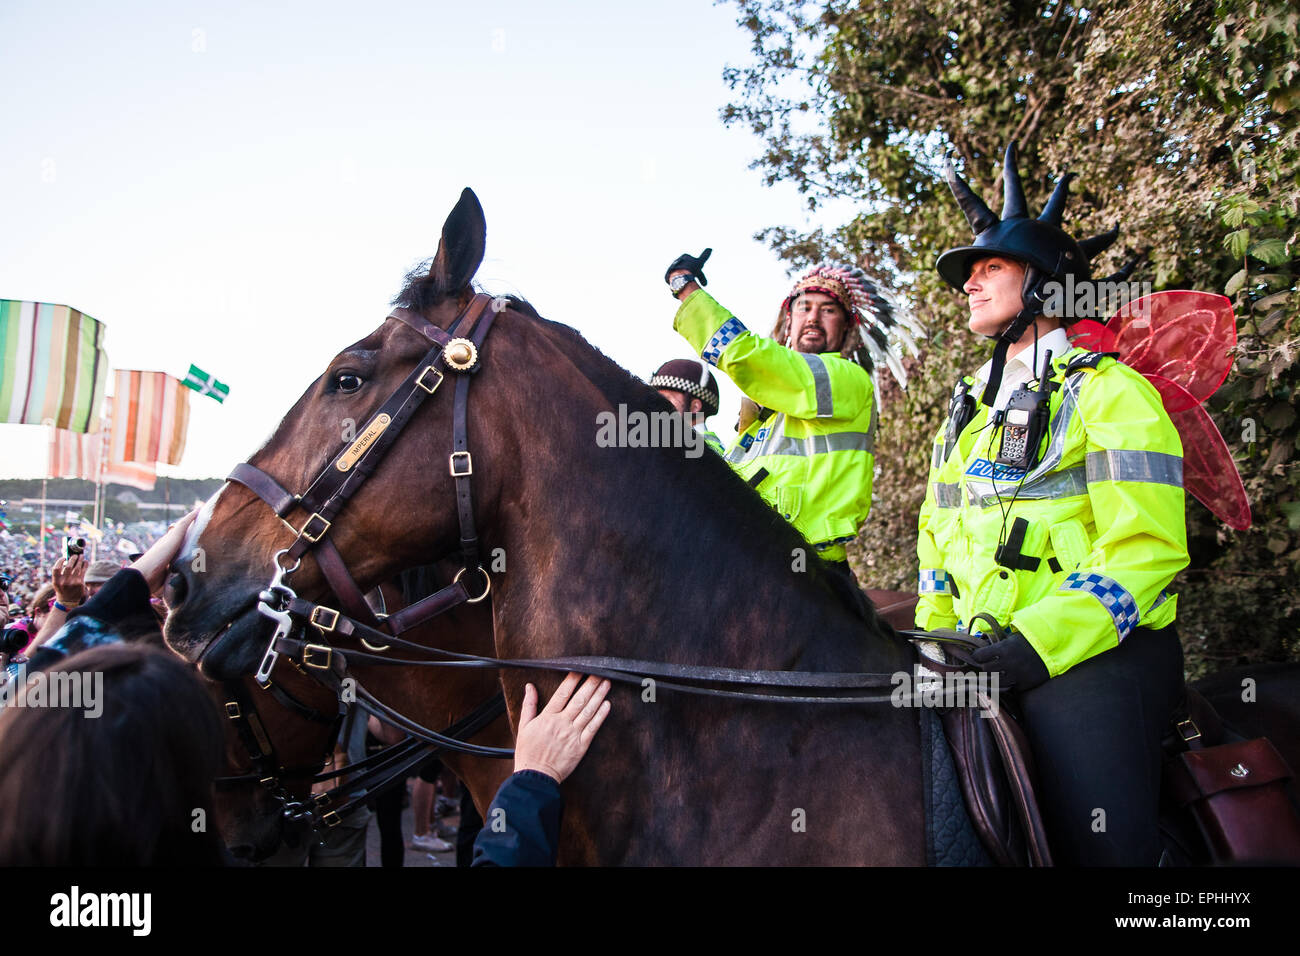 Horse mounted police get into the family party atmosphere by dressing up at Glastonbury Festival/ 'Glasto' held on working farm, Stock Photo